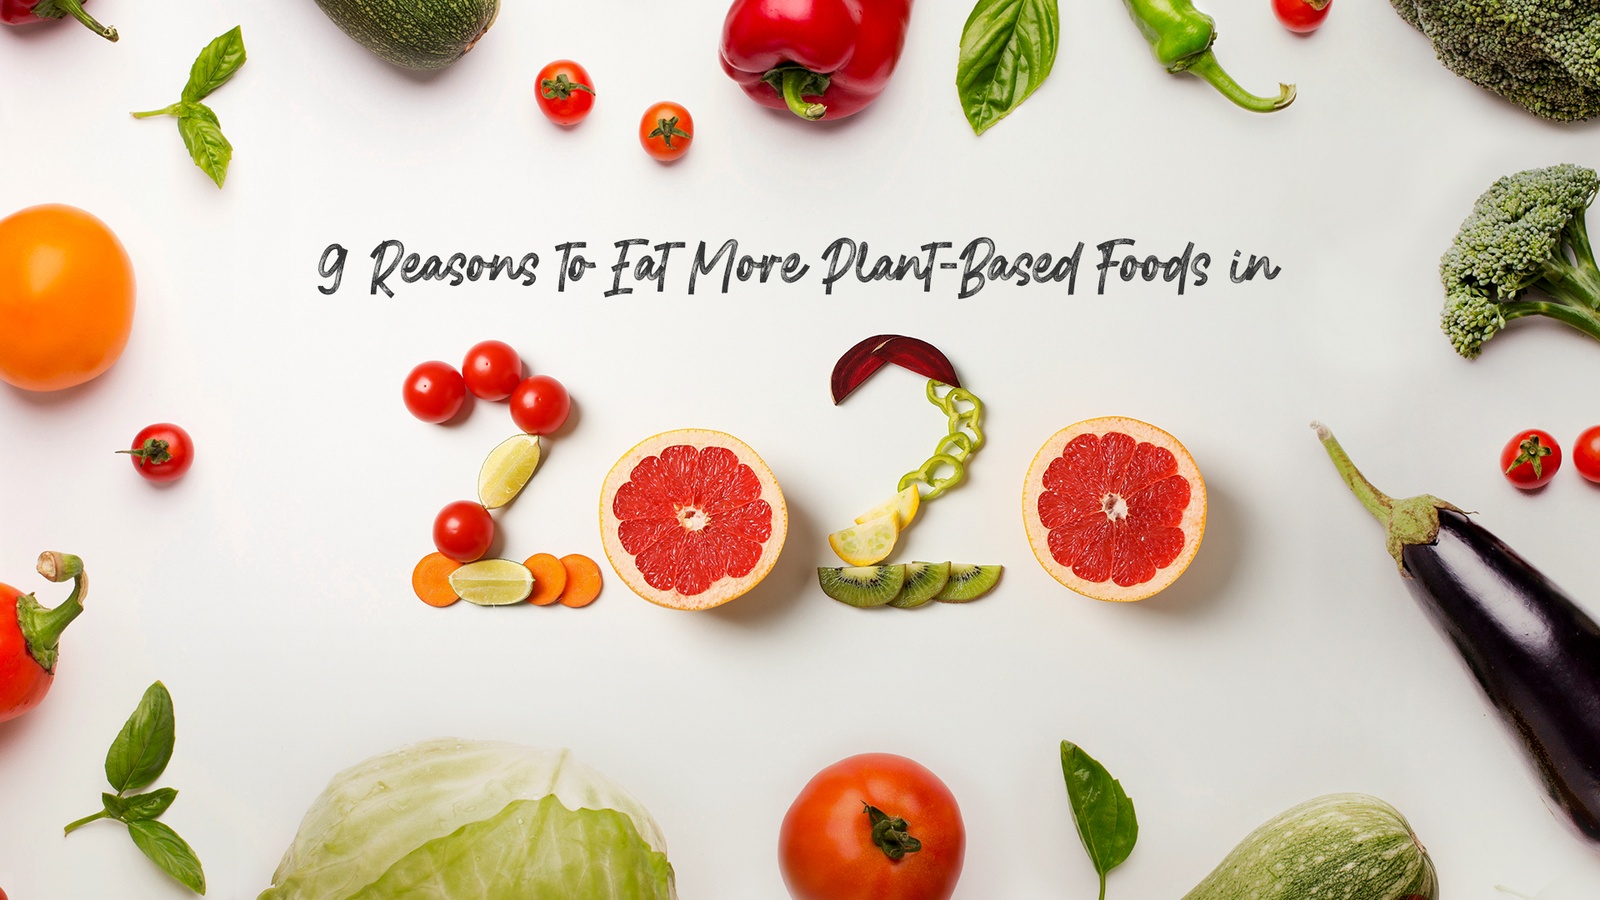 9 Reasons to Eat More Plant-Based Foods in 2020